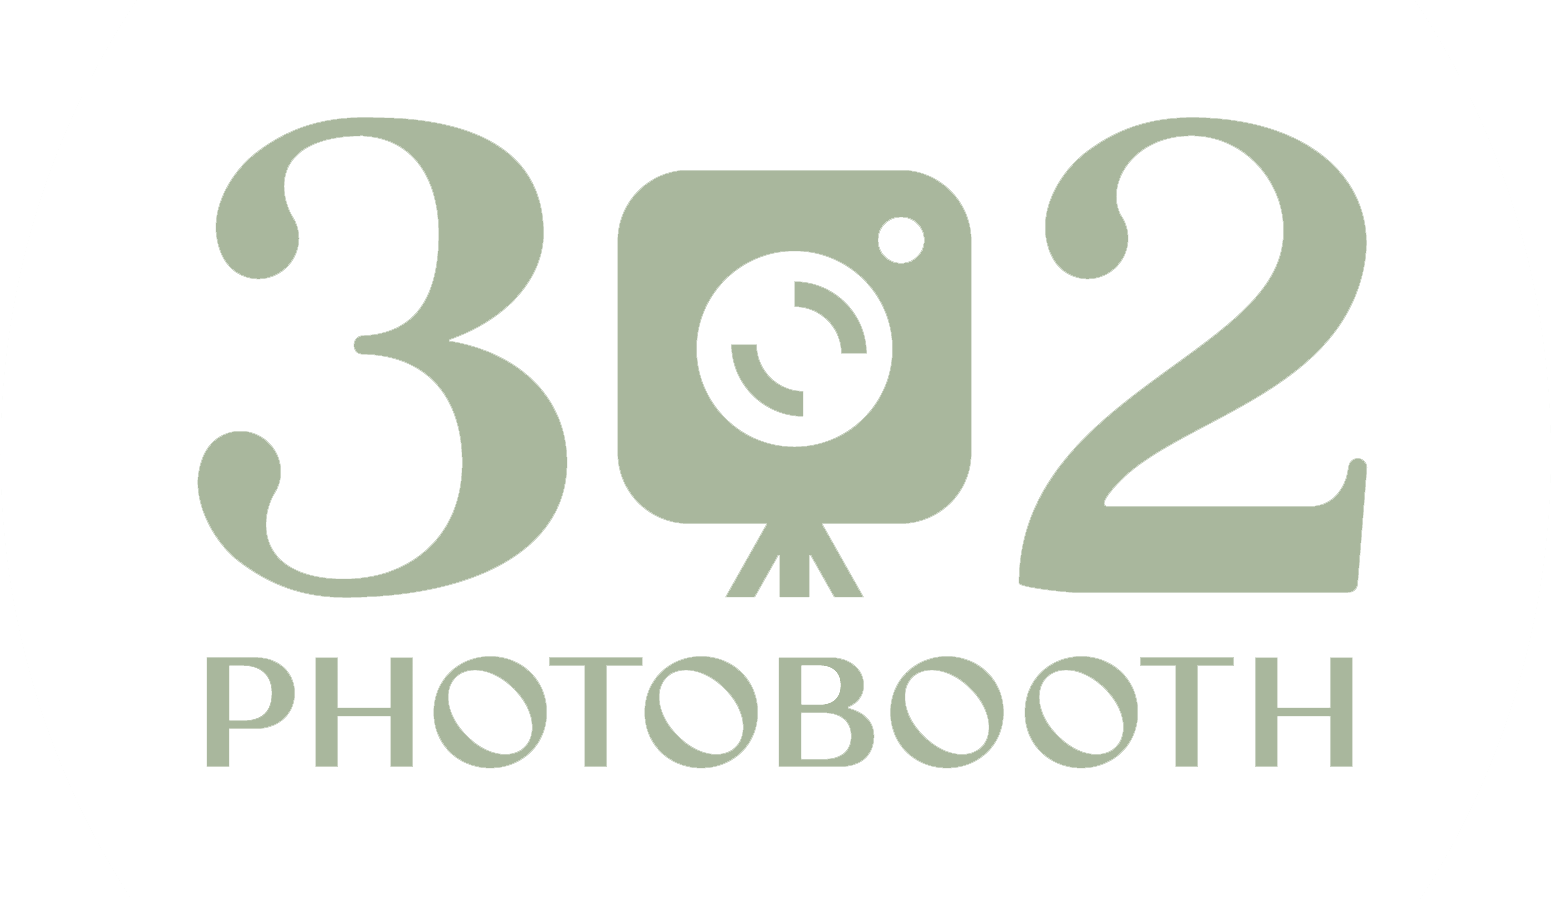 A logo for a photo booth company called 302 photobooth.